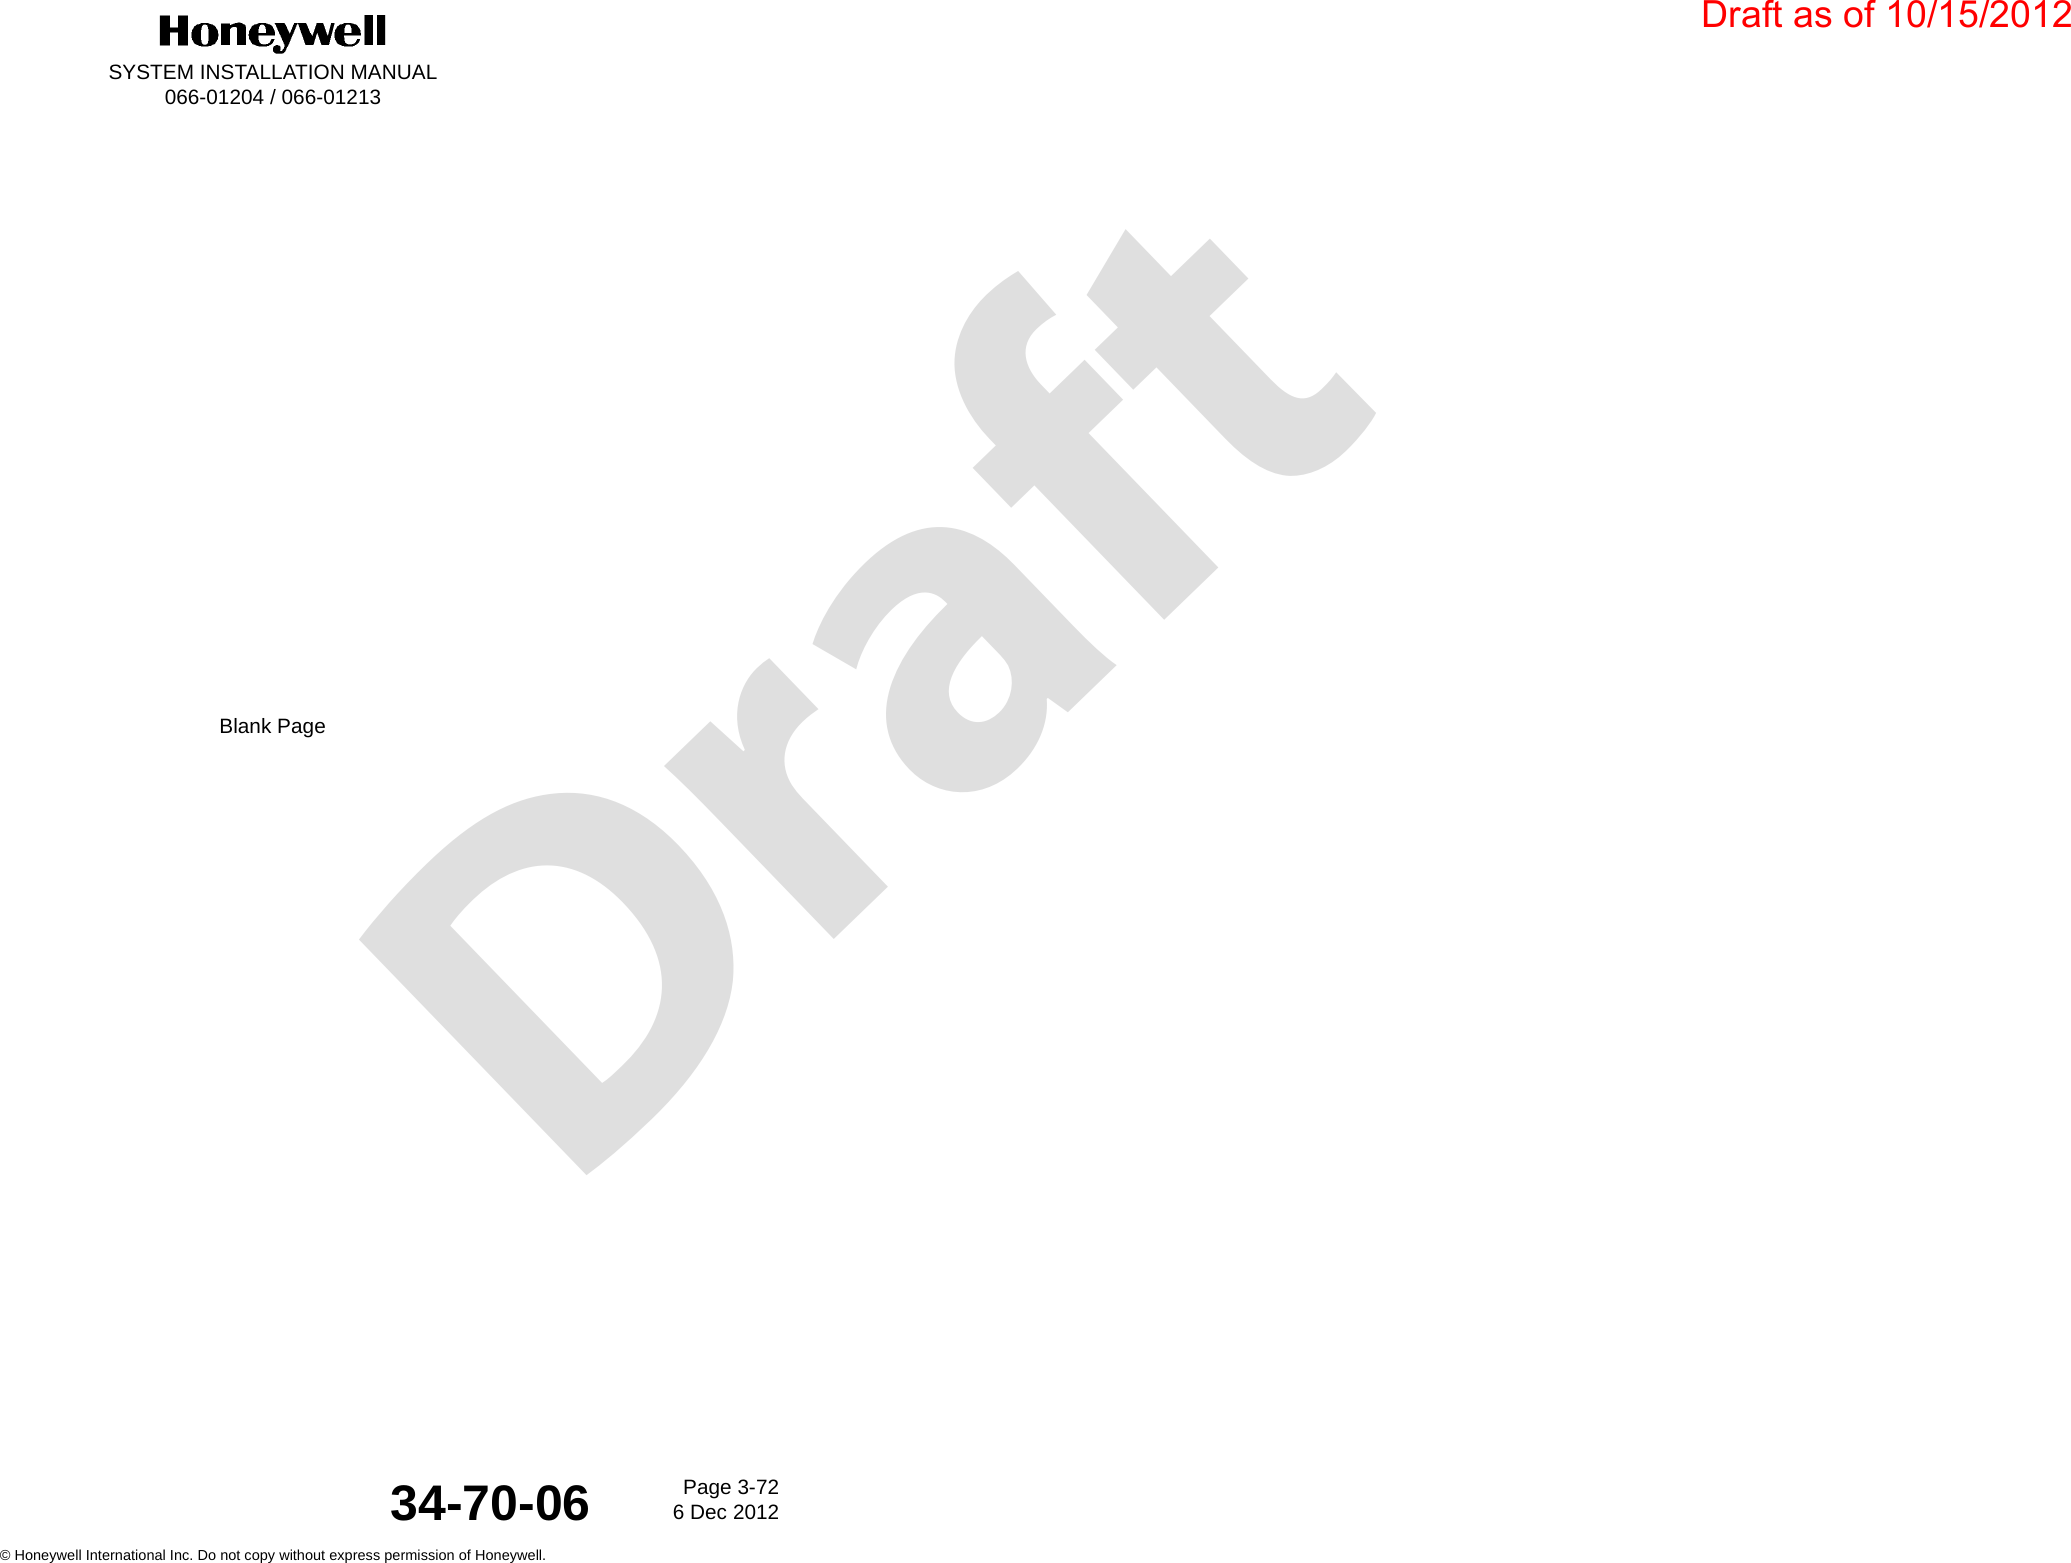 DraftSYSTEM INSTALLATION MANUAL066-01204 / 066-01213Page 3-726 Dec 2012© Honeywell International Inc. Do not copy without express permission of Honeywell.34-70-06Blank PageDraft as of 10/15/2012